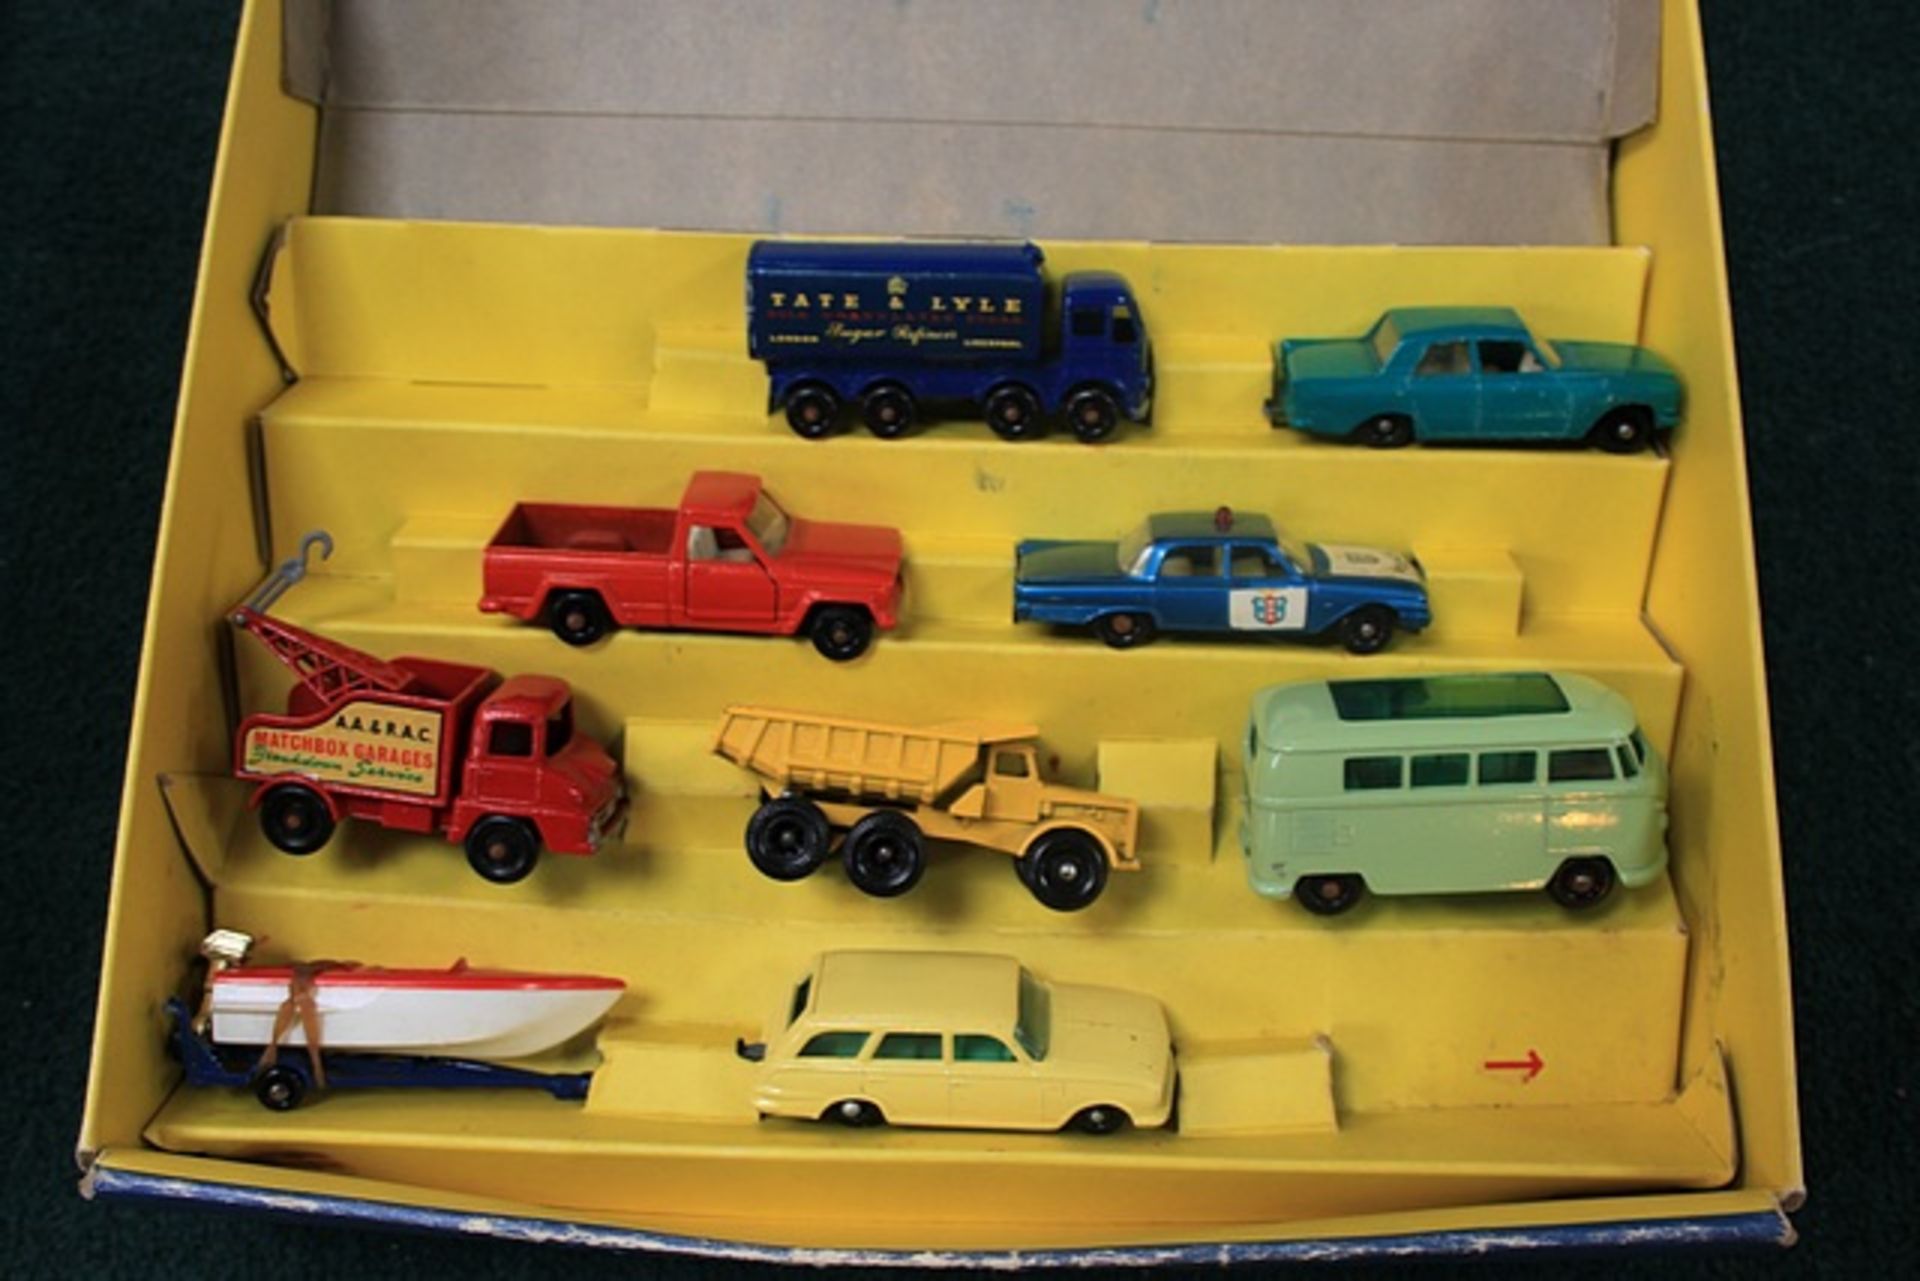 Matchbox Lesney Gift Set Motorway Set Number G-1 Comprising Of 8 Diecast Vehicles And A Boat - Image 4 of 4